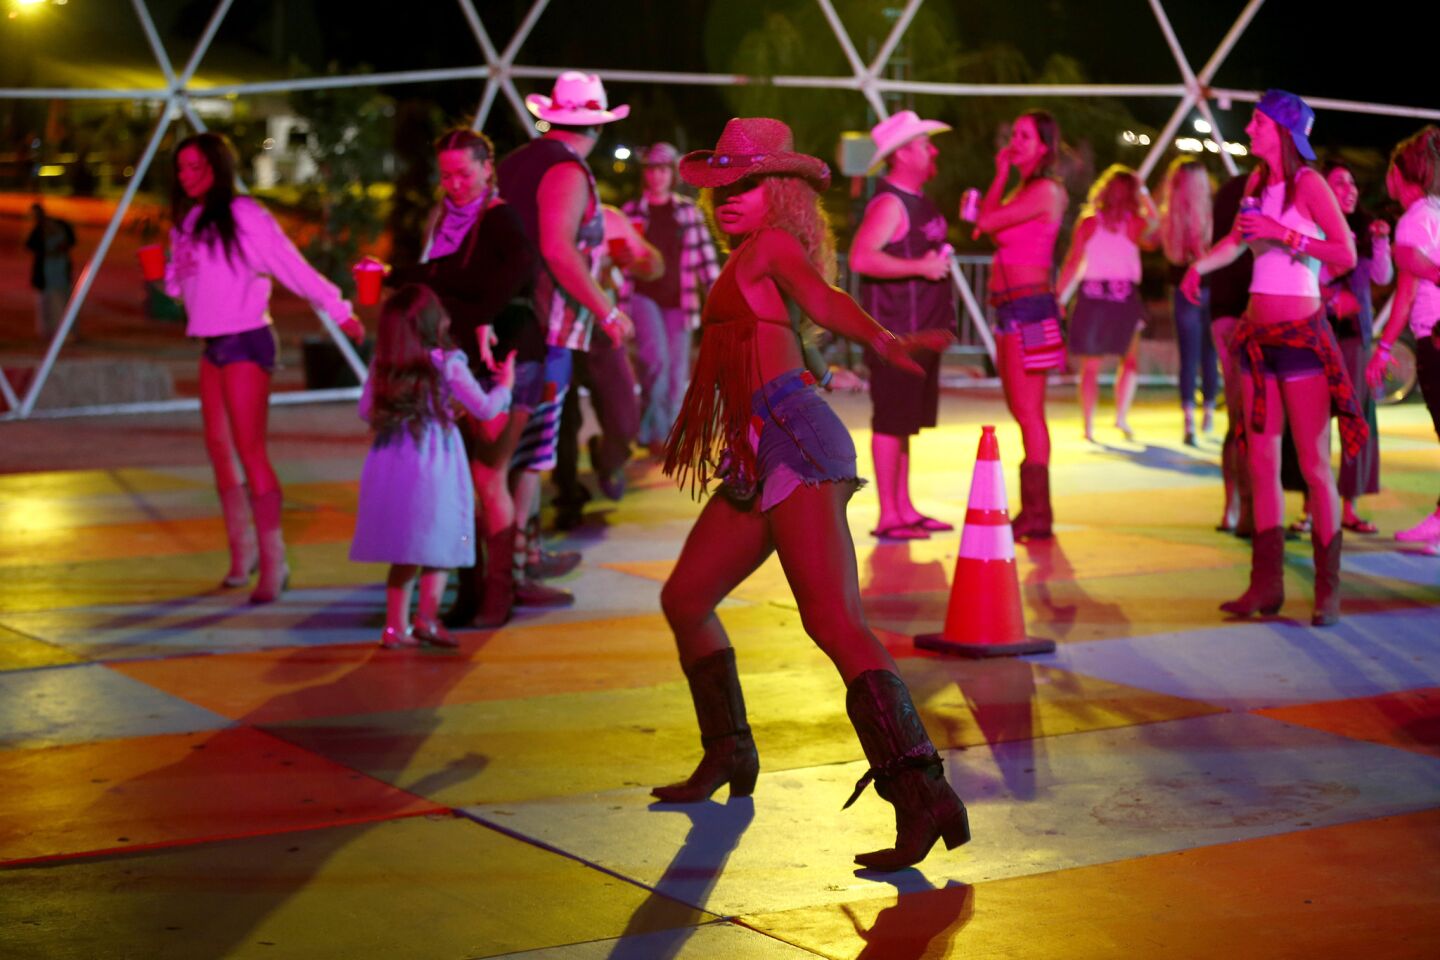 Jamella Perkins, center, joins fellow country music fans line dancing in the Dance Dome at Stagecoach Country Music Festival.